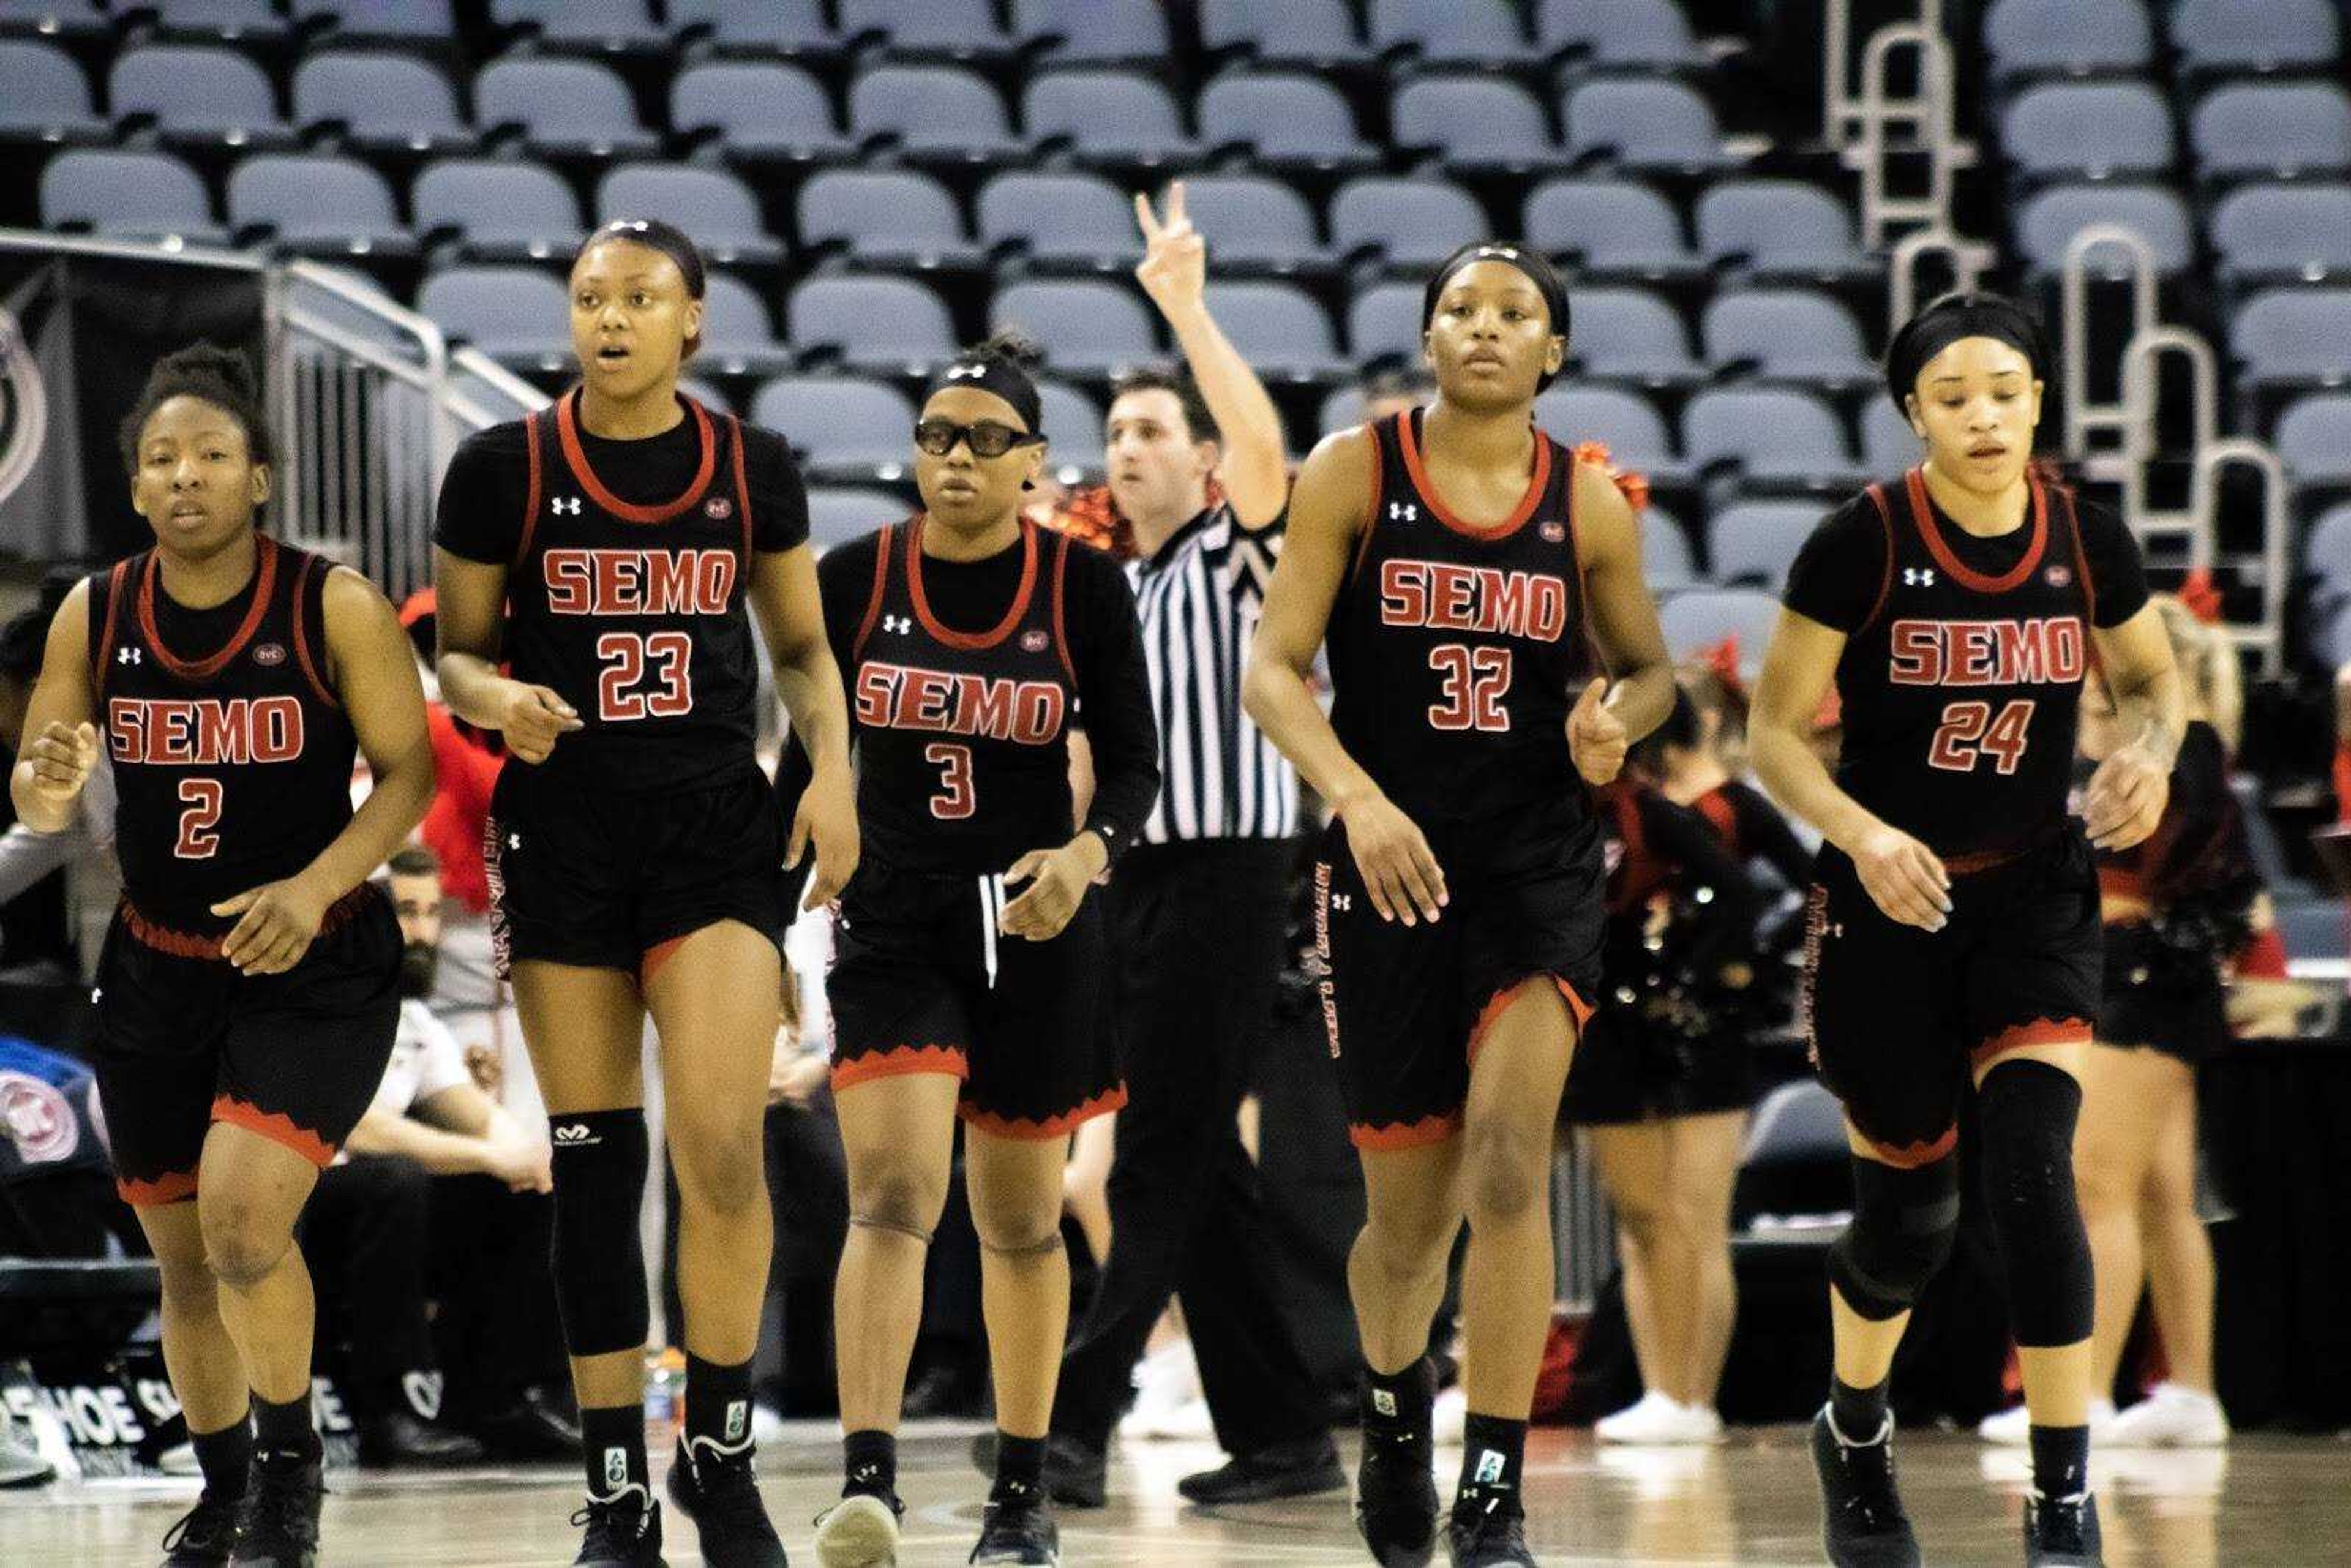 The women’s basketball team jogging onto the court in what would be their final game of the season on March 7 in Evansville, Indiana.